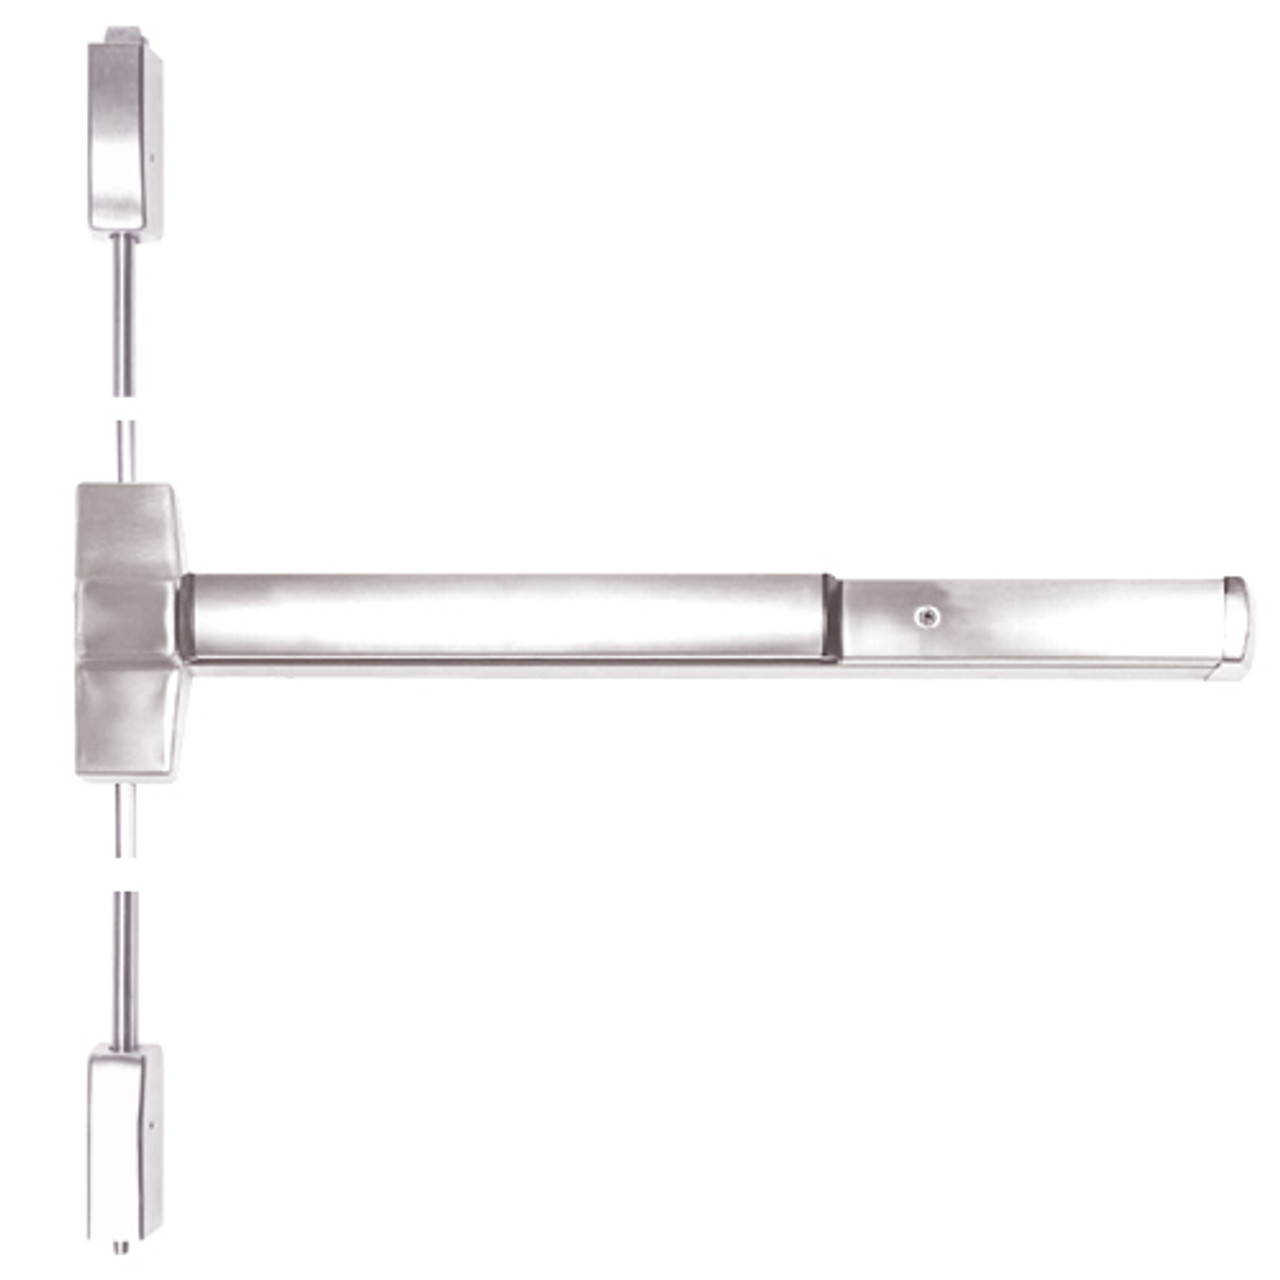 ED5470-629 Corbin ED5400 Series Non Fire Rated Vertical Rod Exit Device in Bright Stainless Steel Finish